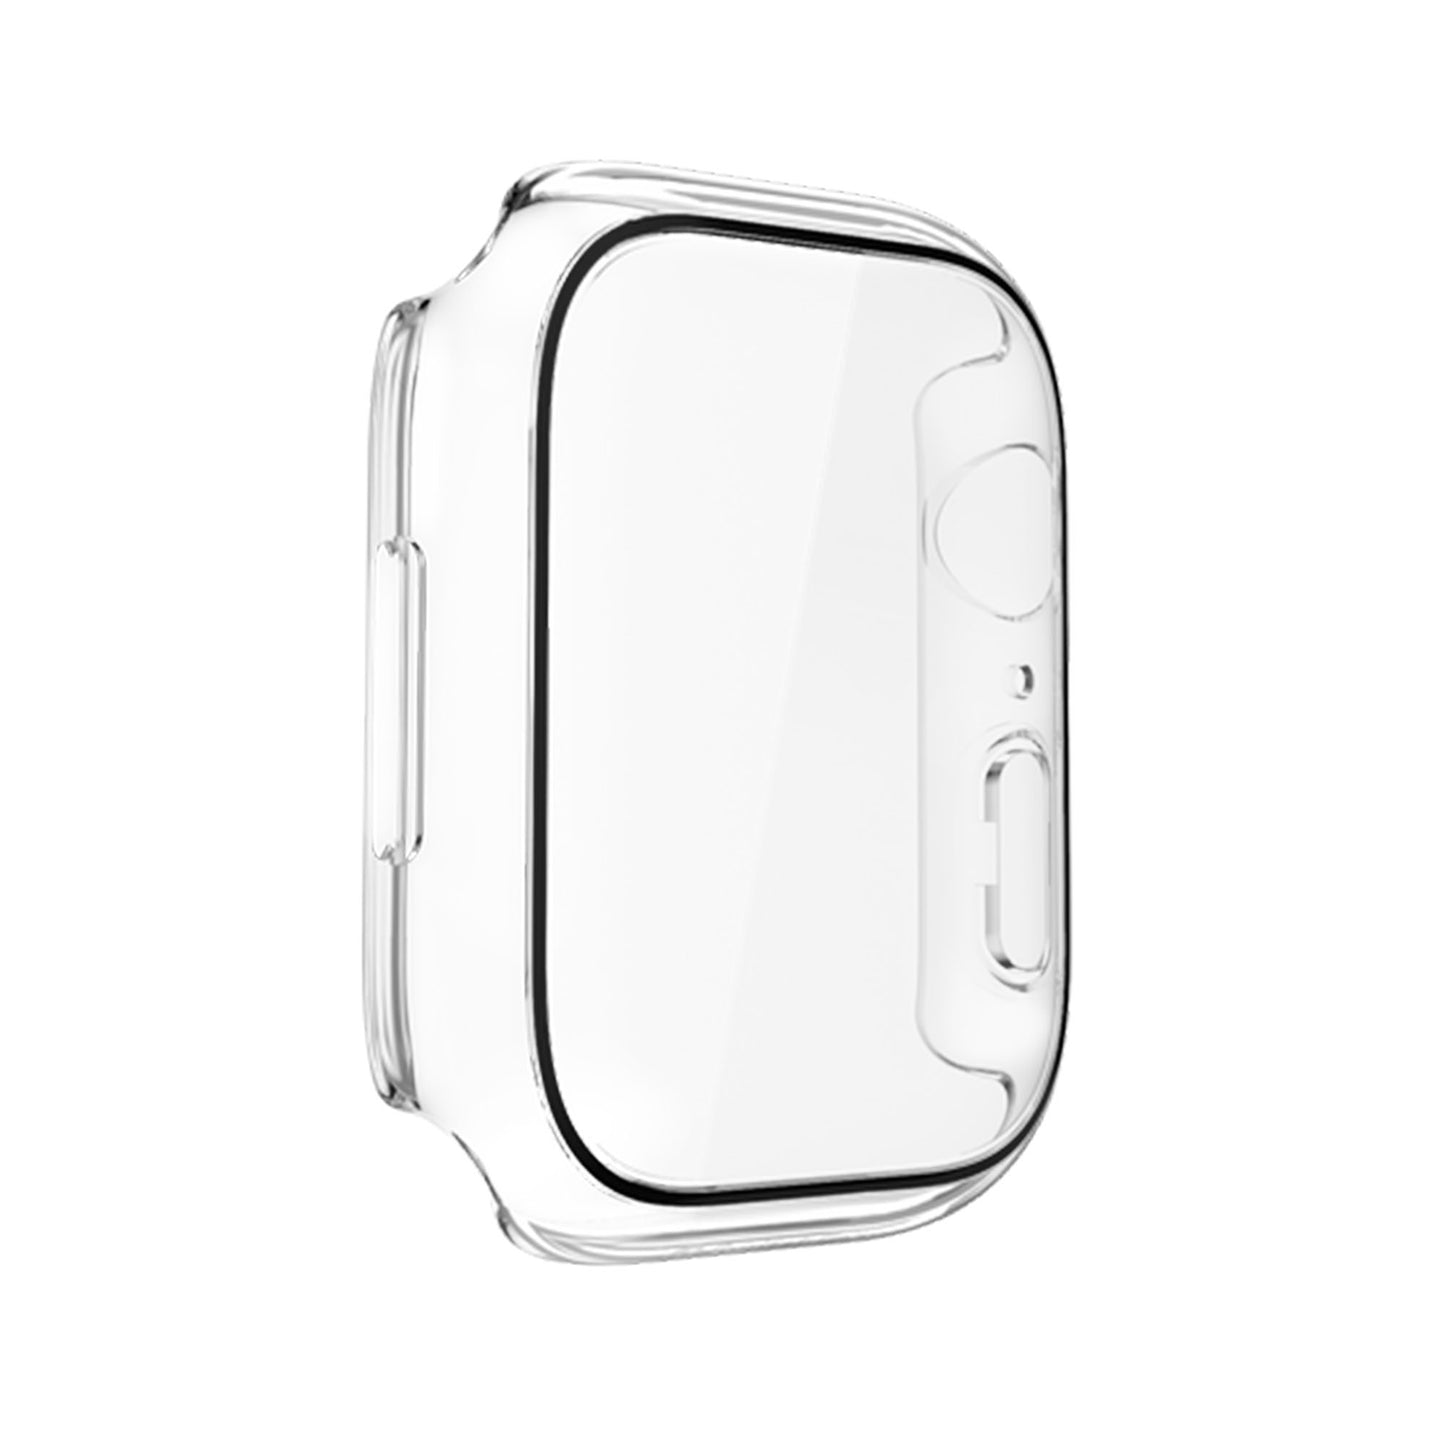 SwitchEasy Nude 2 in 1 Tempered Glass Hybrid Case for Apple Watch Series 7 ( 45mm ) with Build In Tempered Glass - Transparent (Barcode: 4895241108426 )